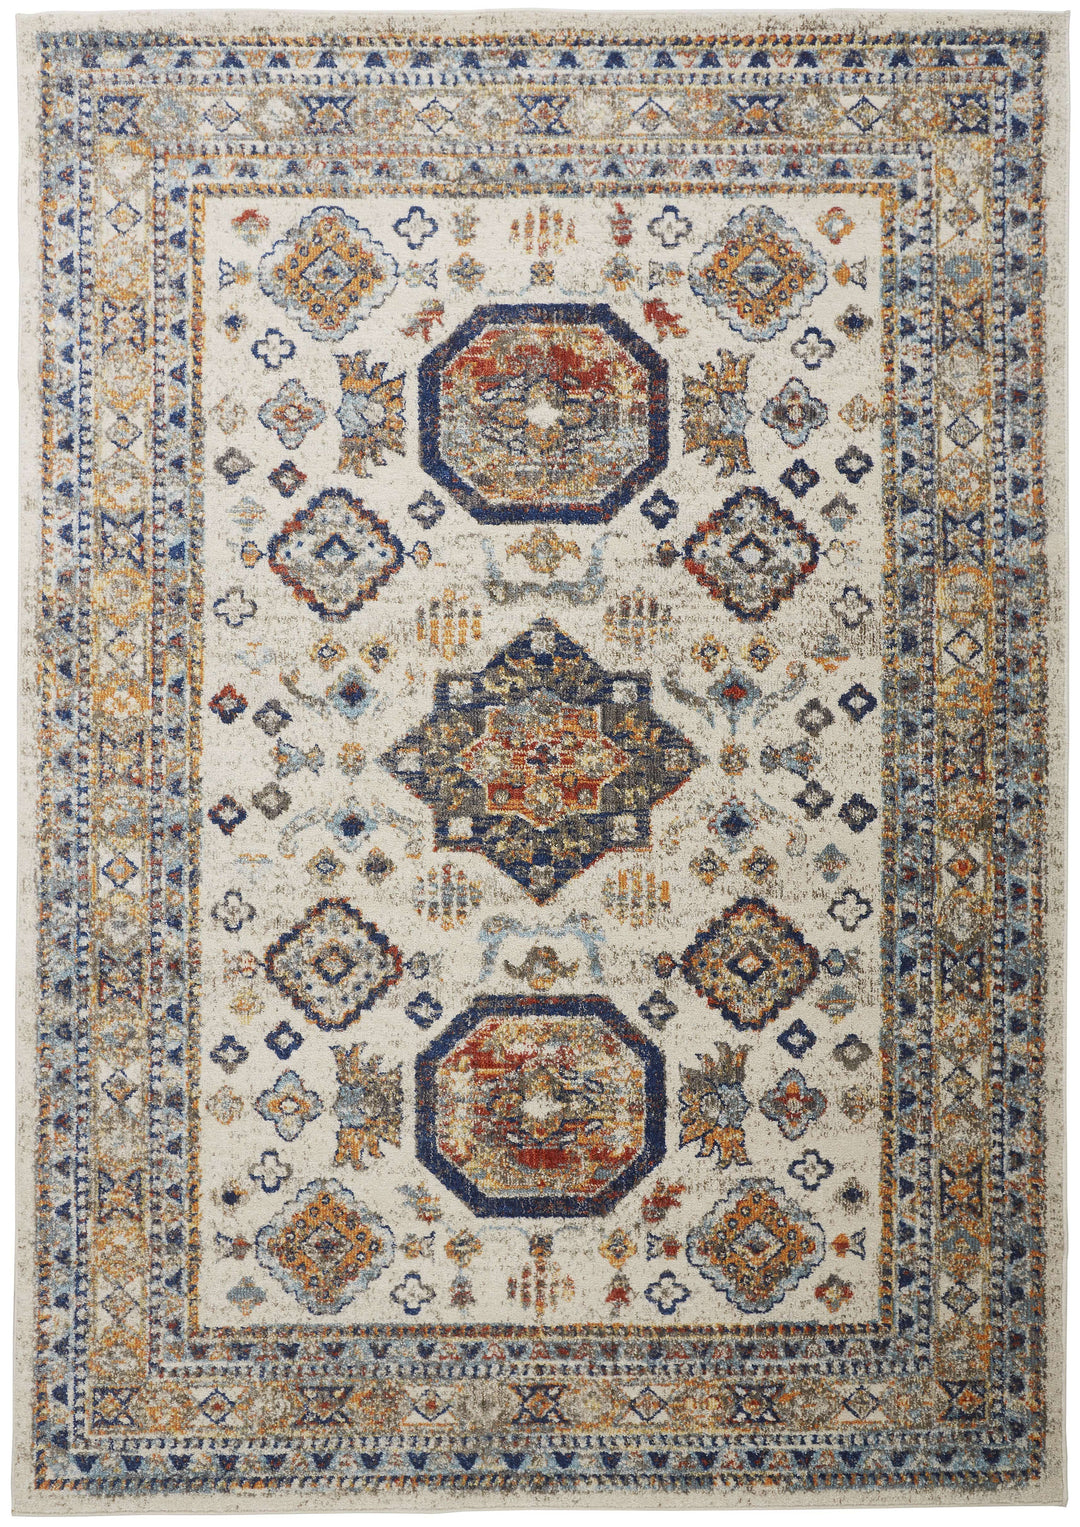 Feizy Feizy Bellini Vintage Bohemian Rug - Bright Orange & Blue - Available in 8 Sizes 5'-3" x 7'-6" I78I3137MLT000E76